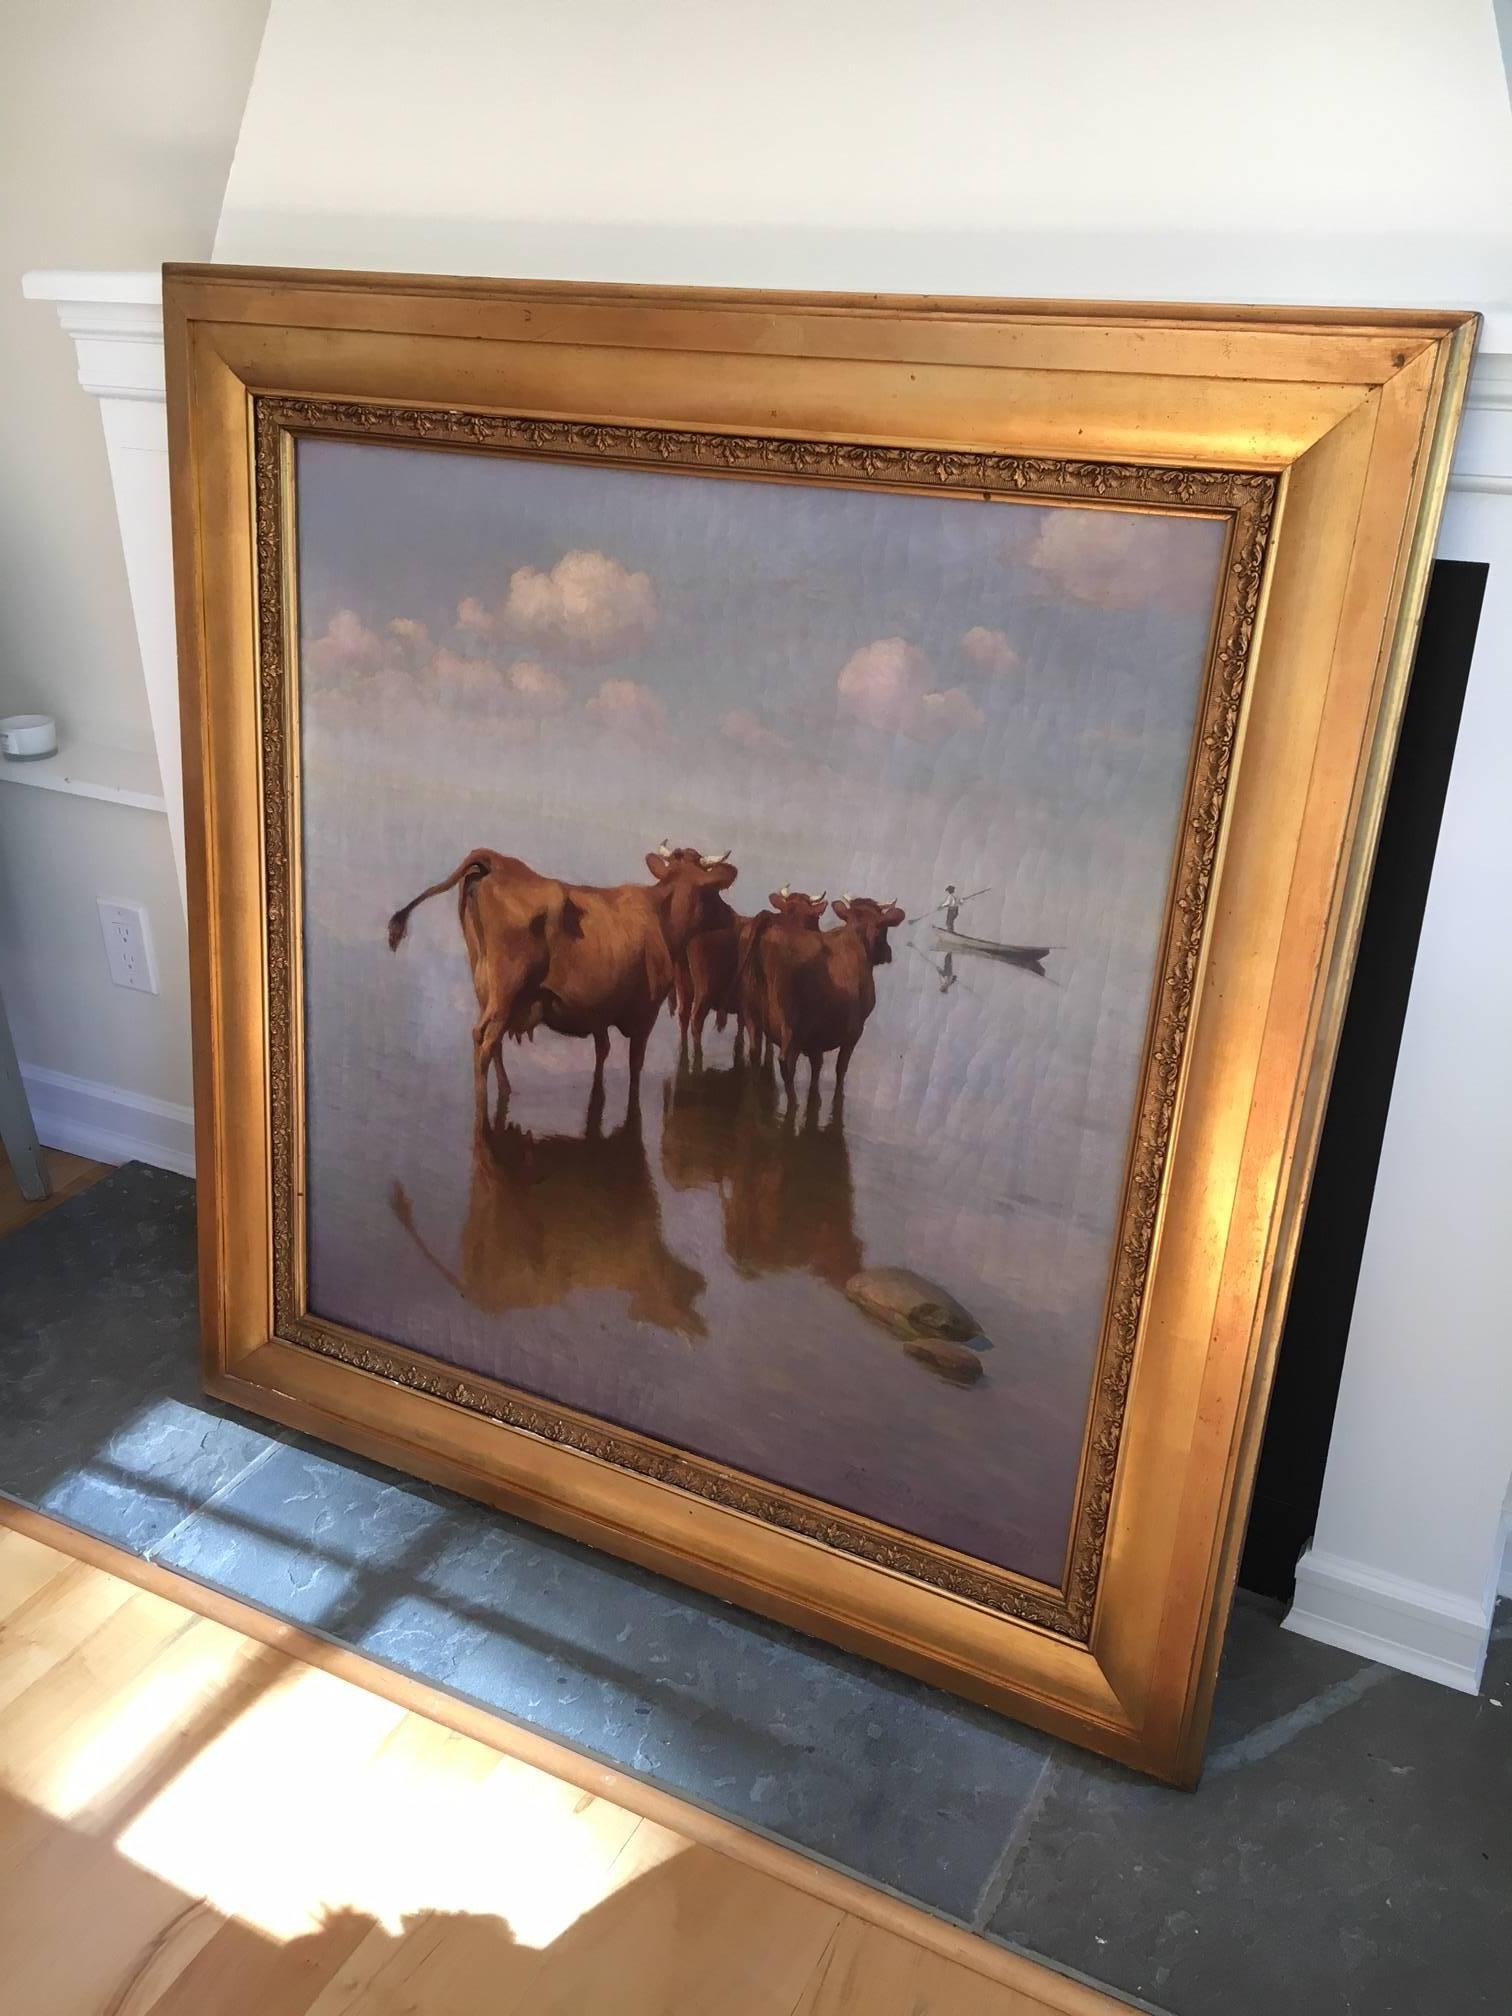 Wonderful large oil painting of cows observing a fisherman in the water, by well-known Danish painter Hans Ole Brasen. He has perfectly captured the charm and curiosity of cows as they observe a fisherman plying his trade in the early light of day.